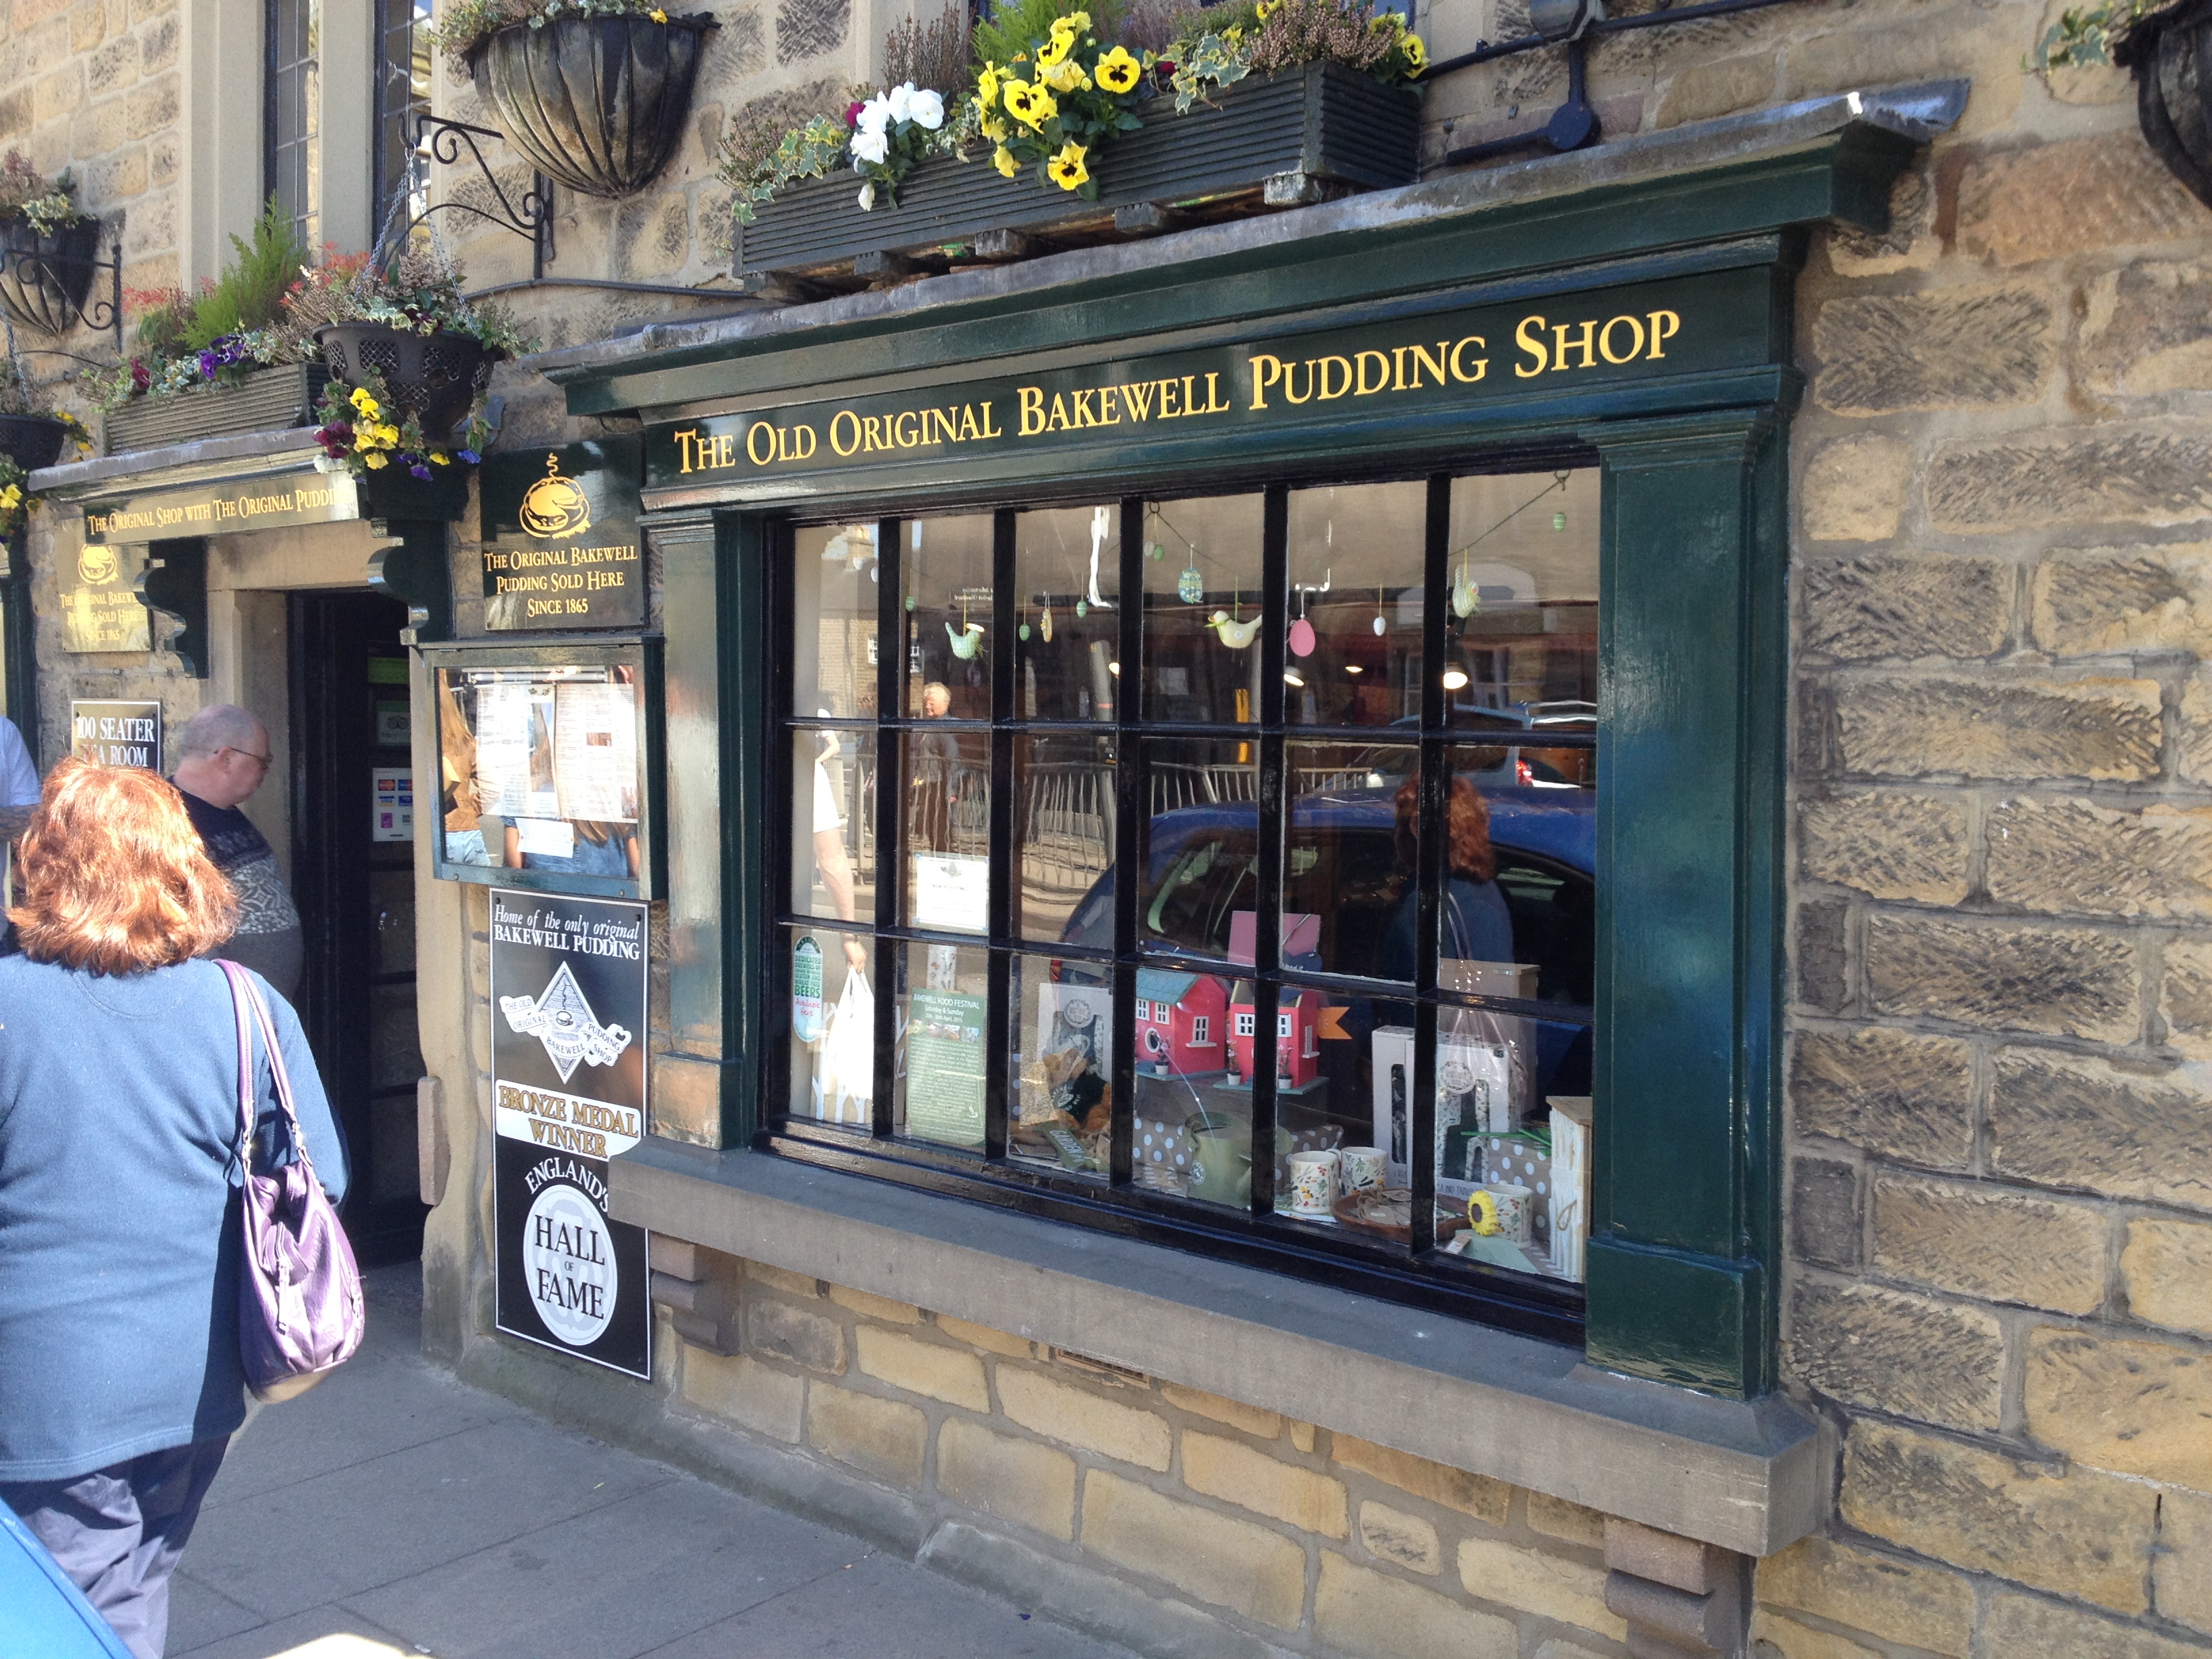 The Original Bakewell Pudding Shop